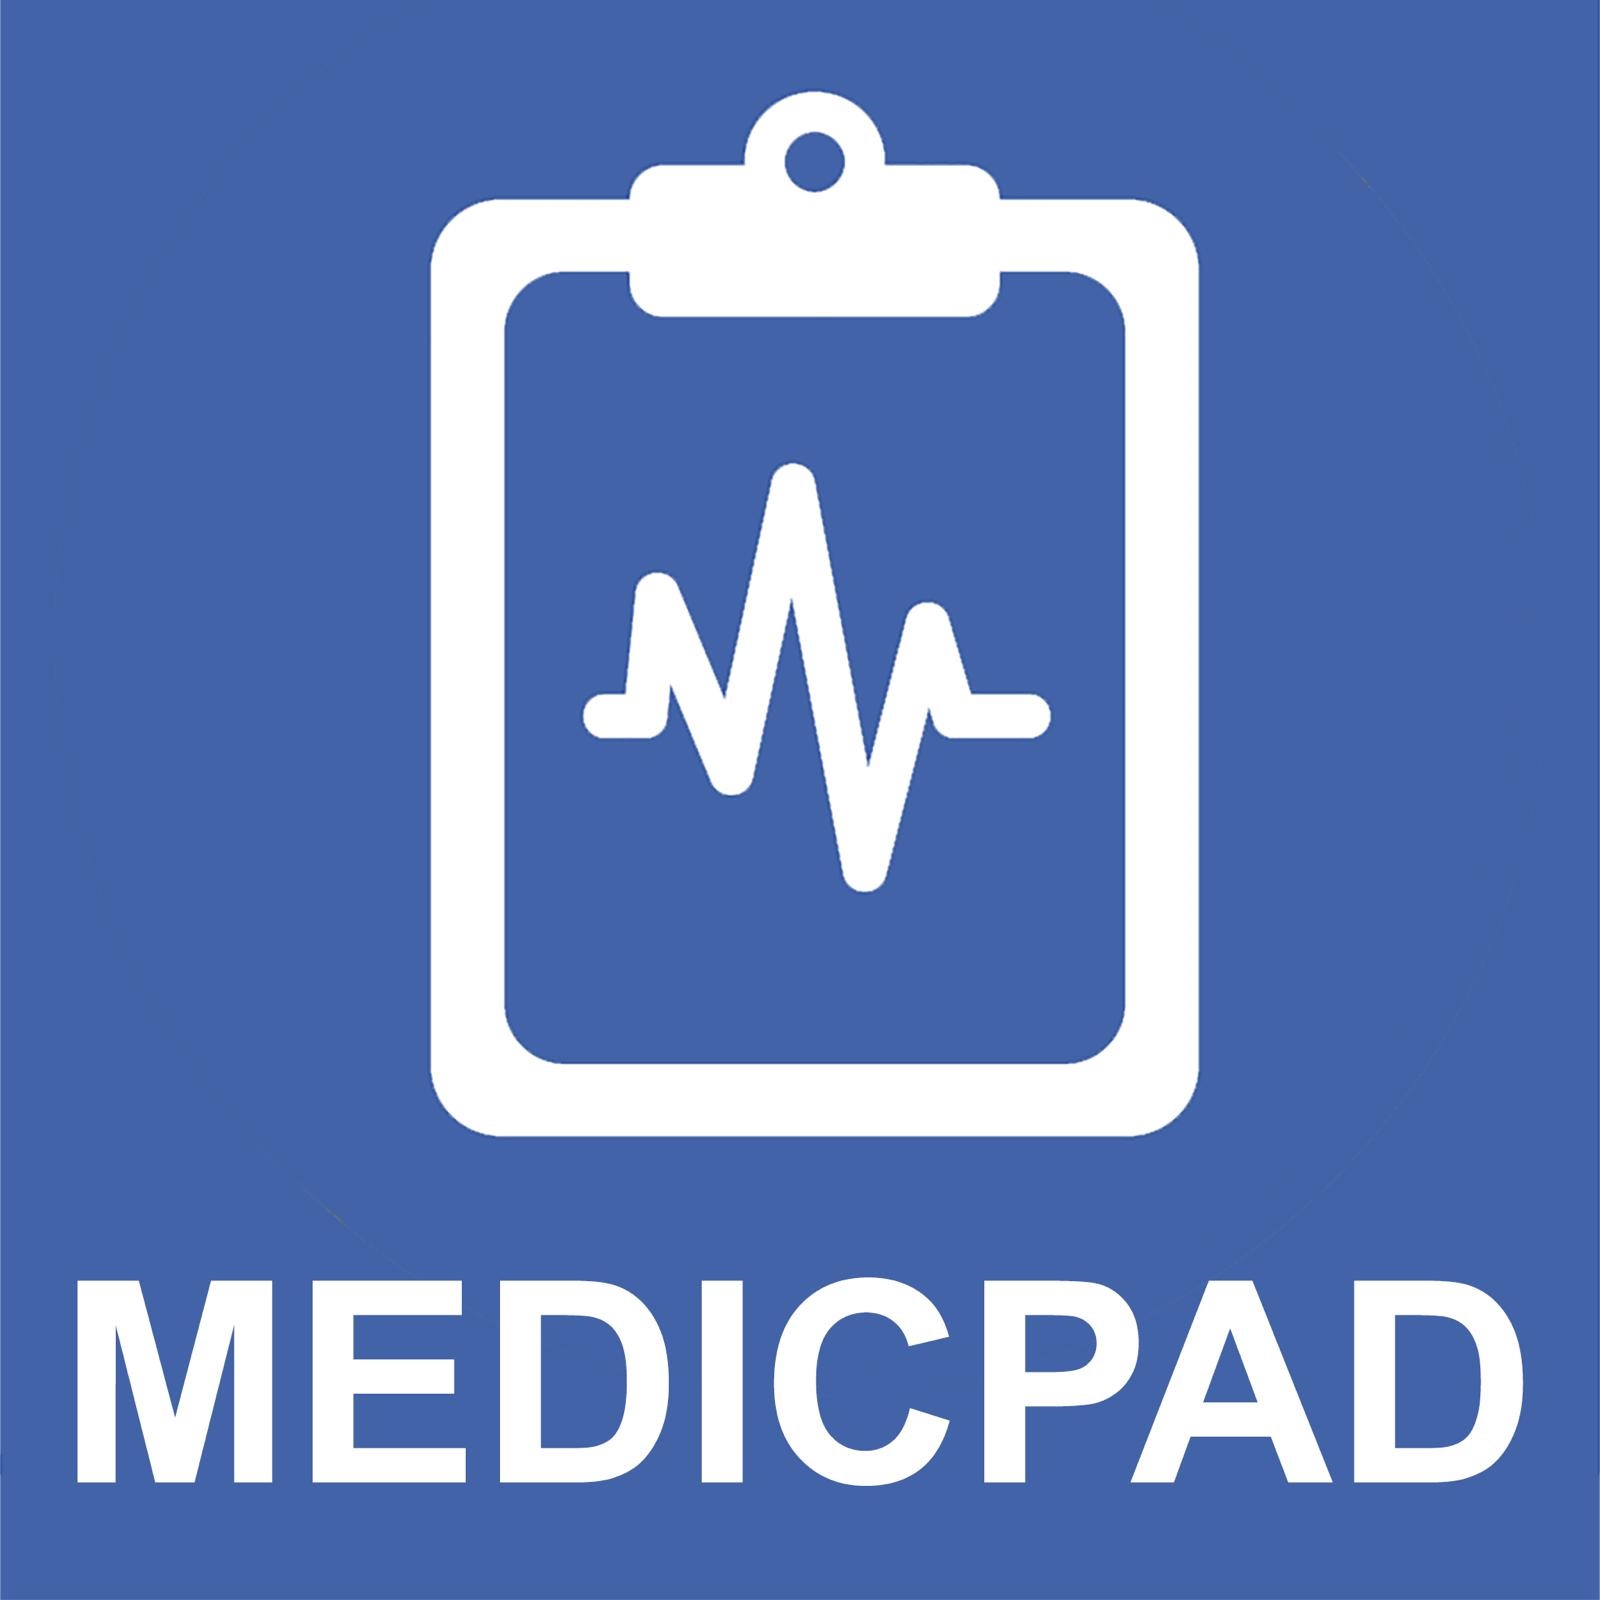 From idea to healthcare revolution in 7 days. The story of MedicPad